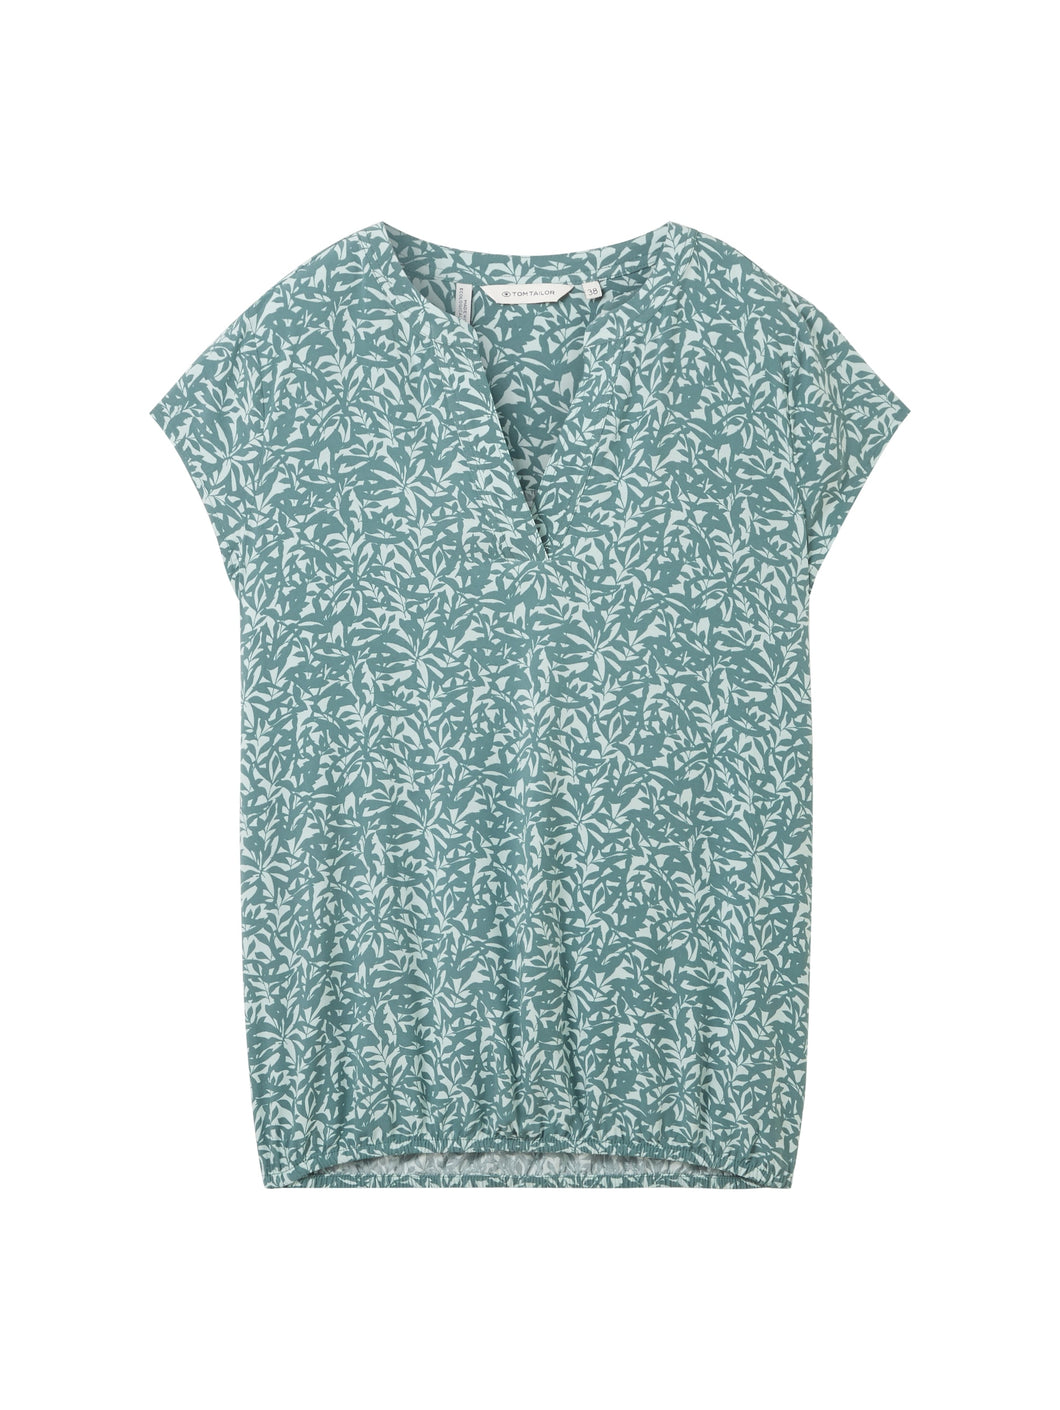 TOM TAILOR BLOUSE PRINTED green abstract leaf print